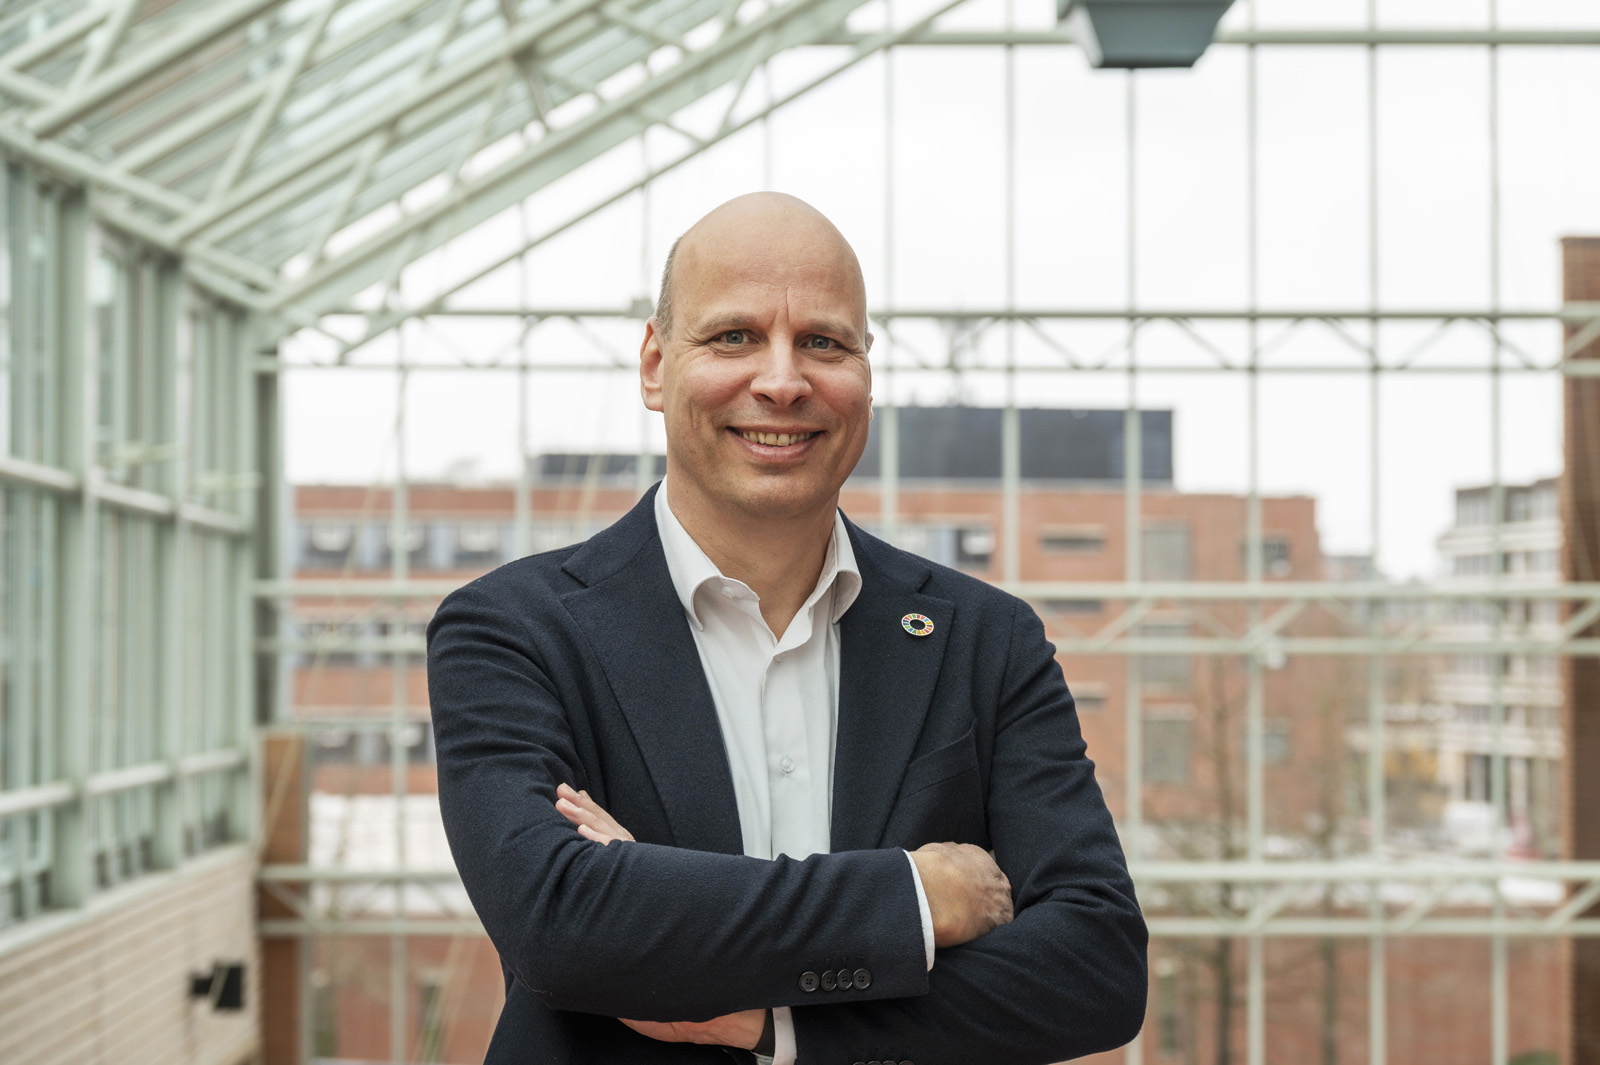 Reggy van der Wielen has been appointed chair of the Executive Board of HAS  University of Applied Sciences